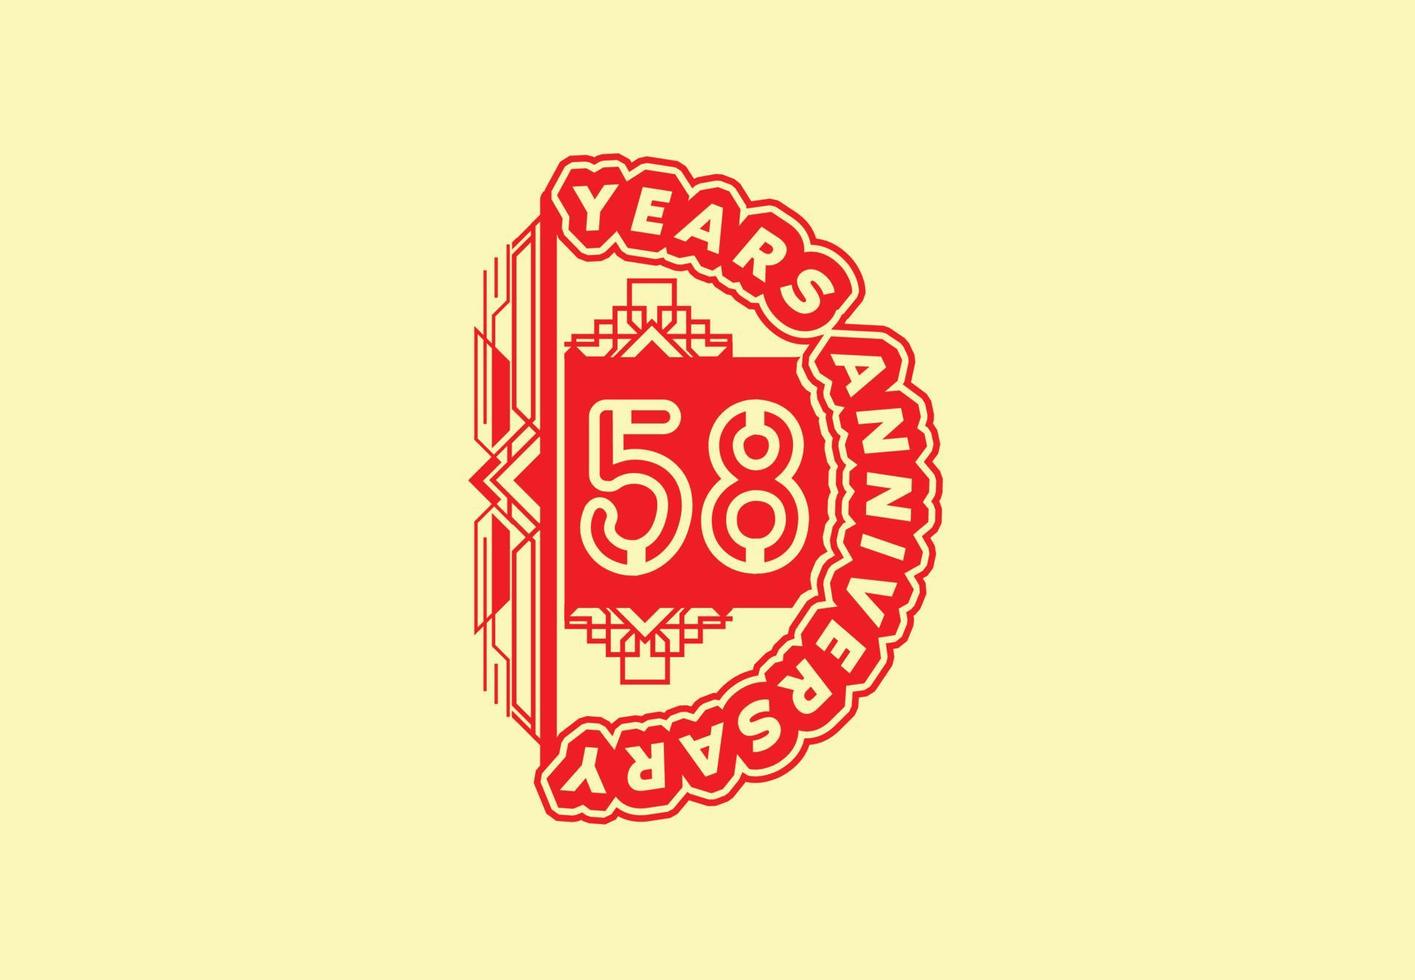 58 years anniversary logo and sticker design template vector